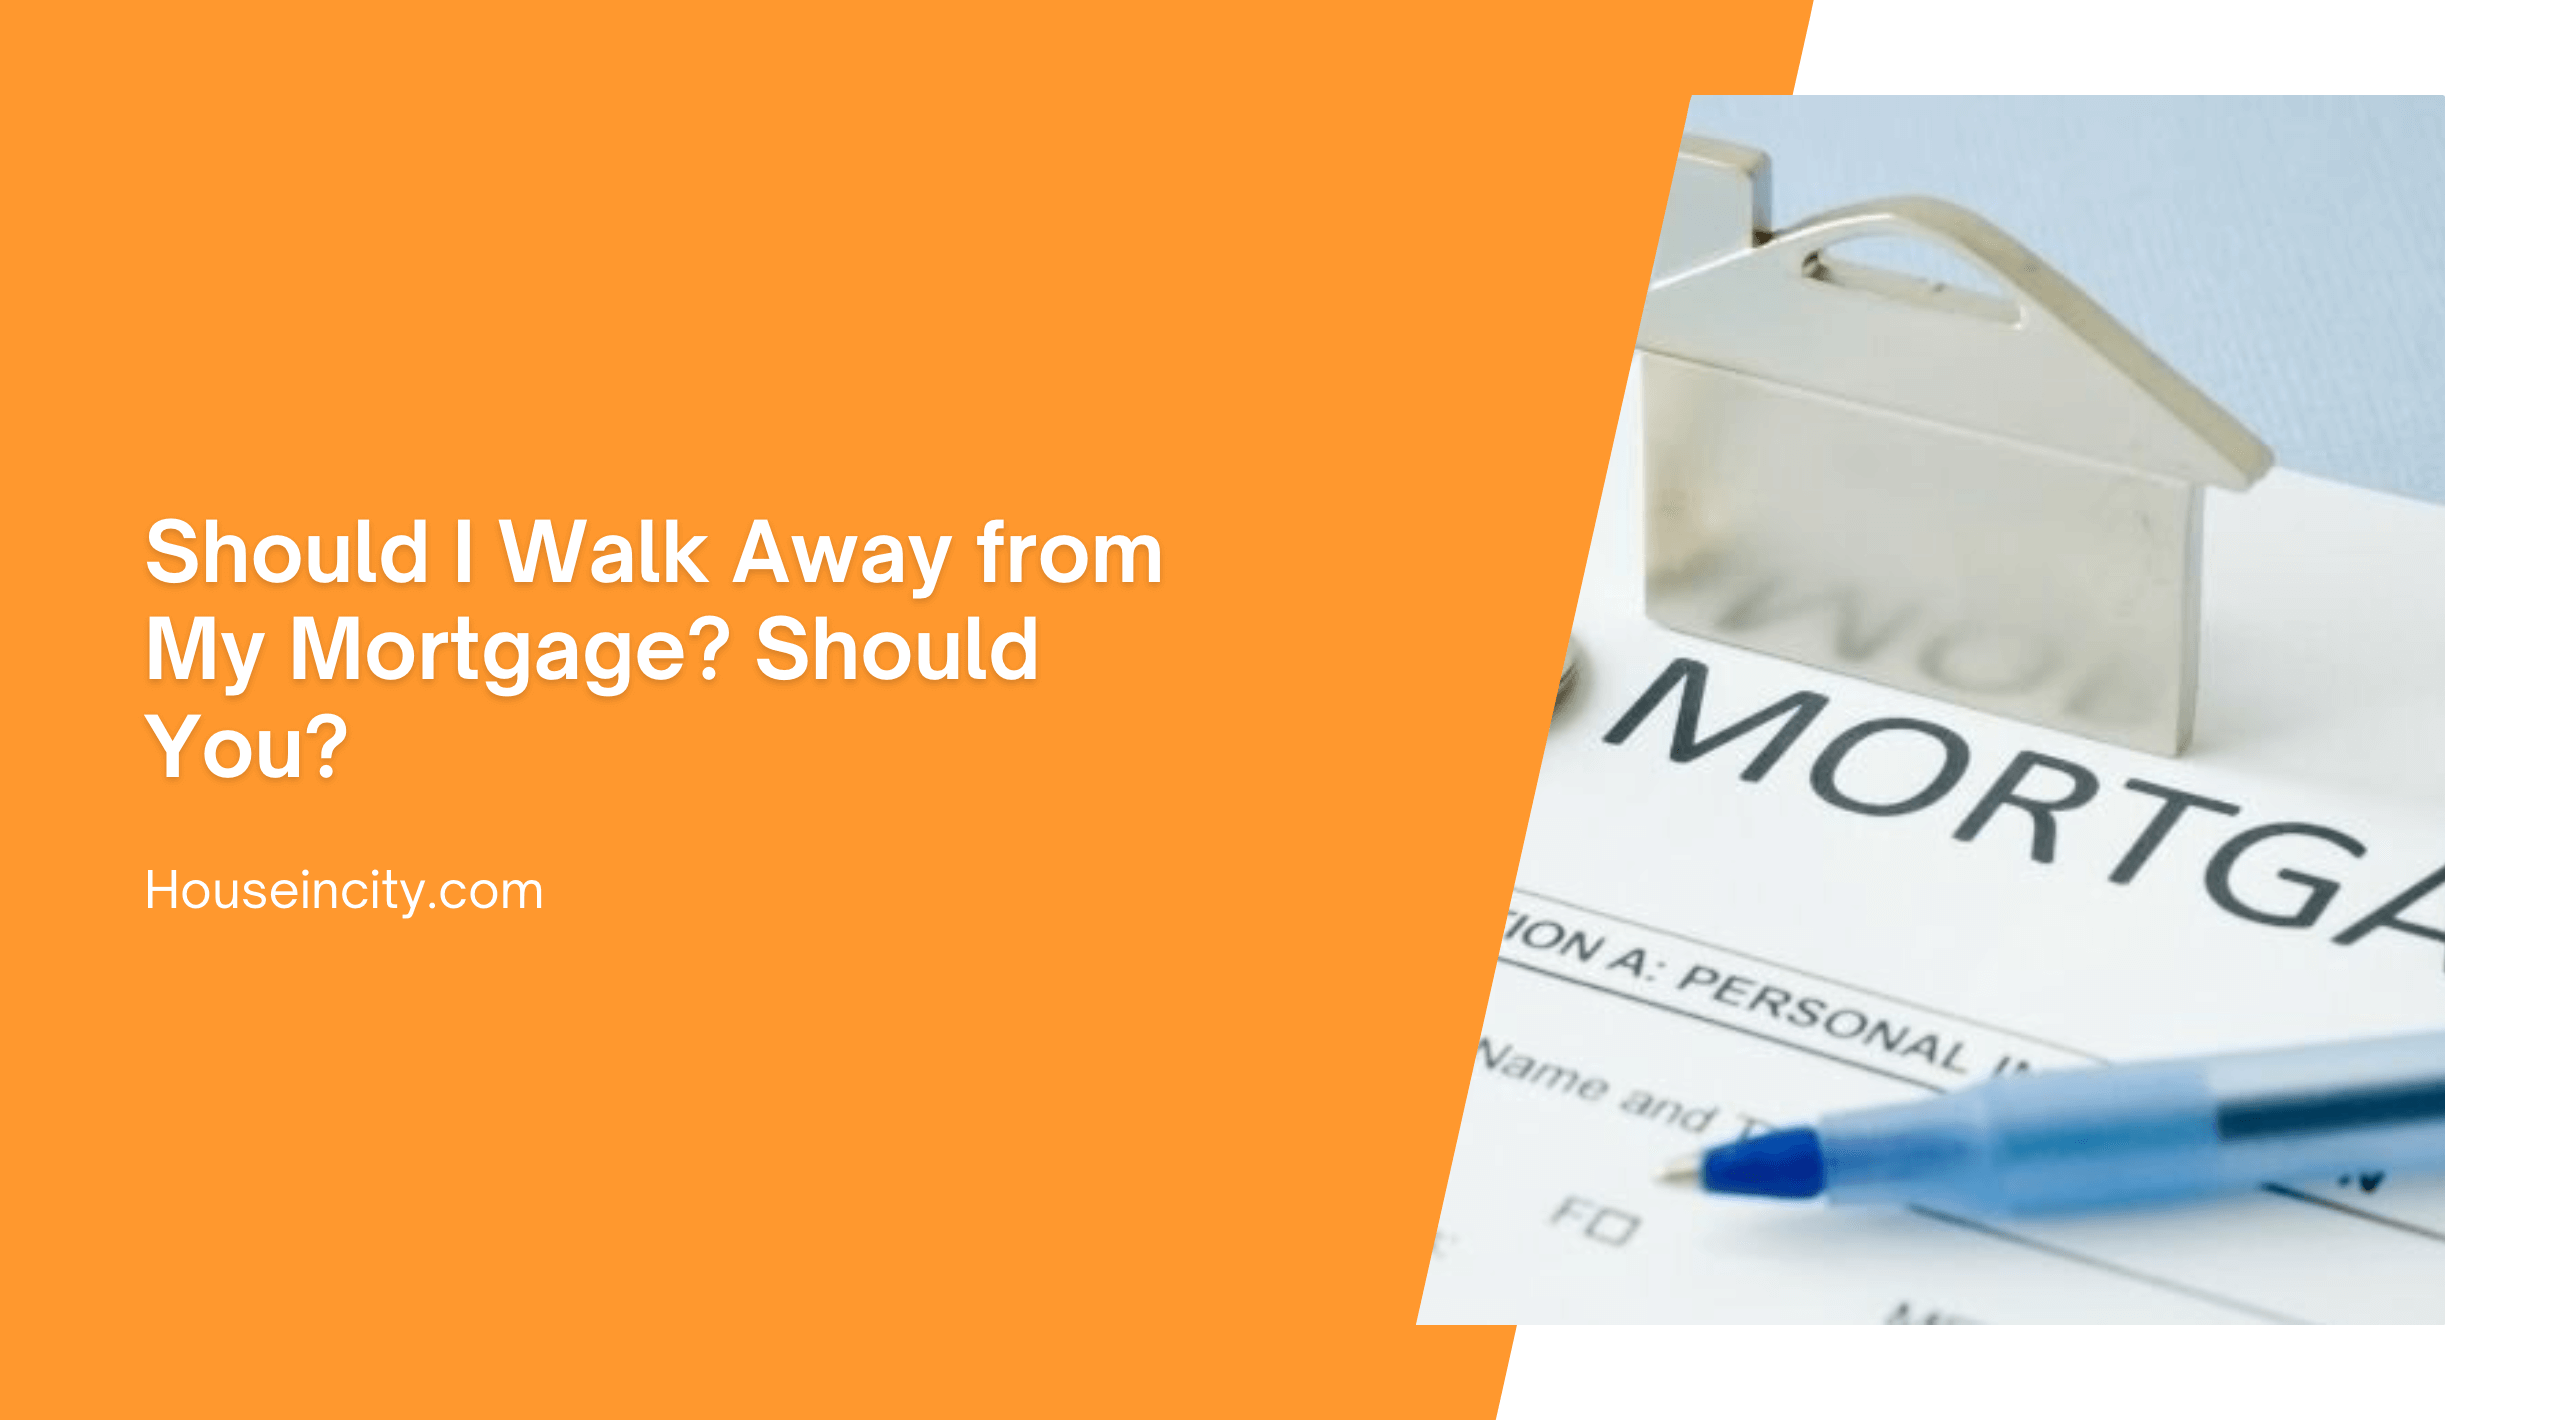 Should I Walk Away from My Mortgage? Should You?